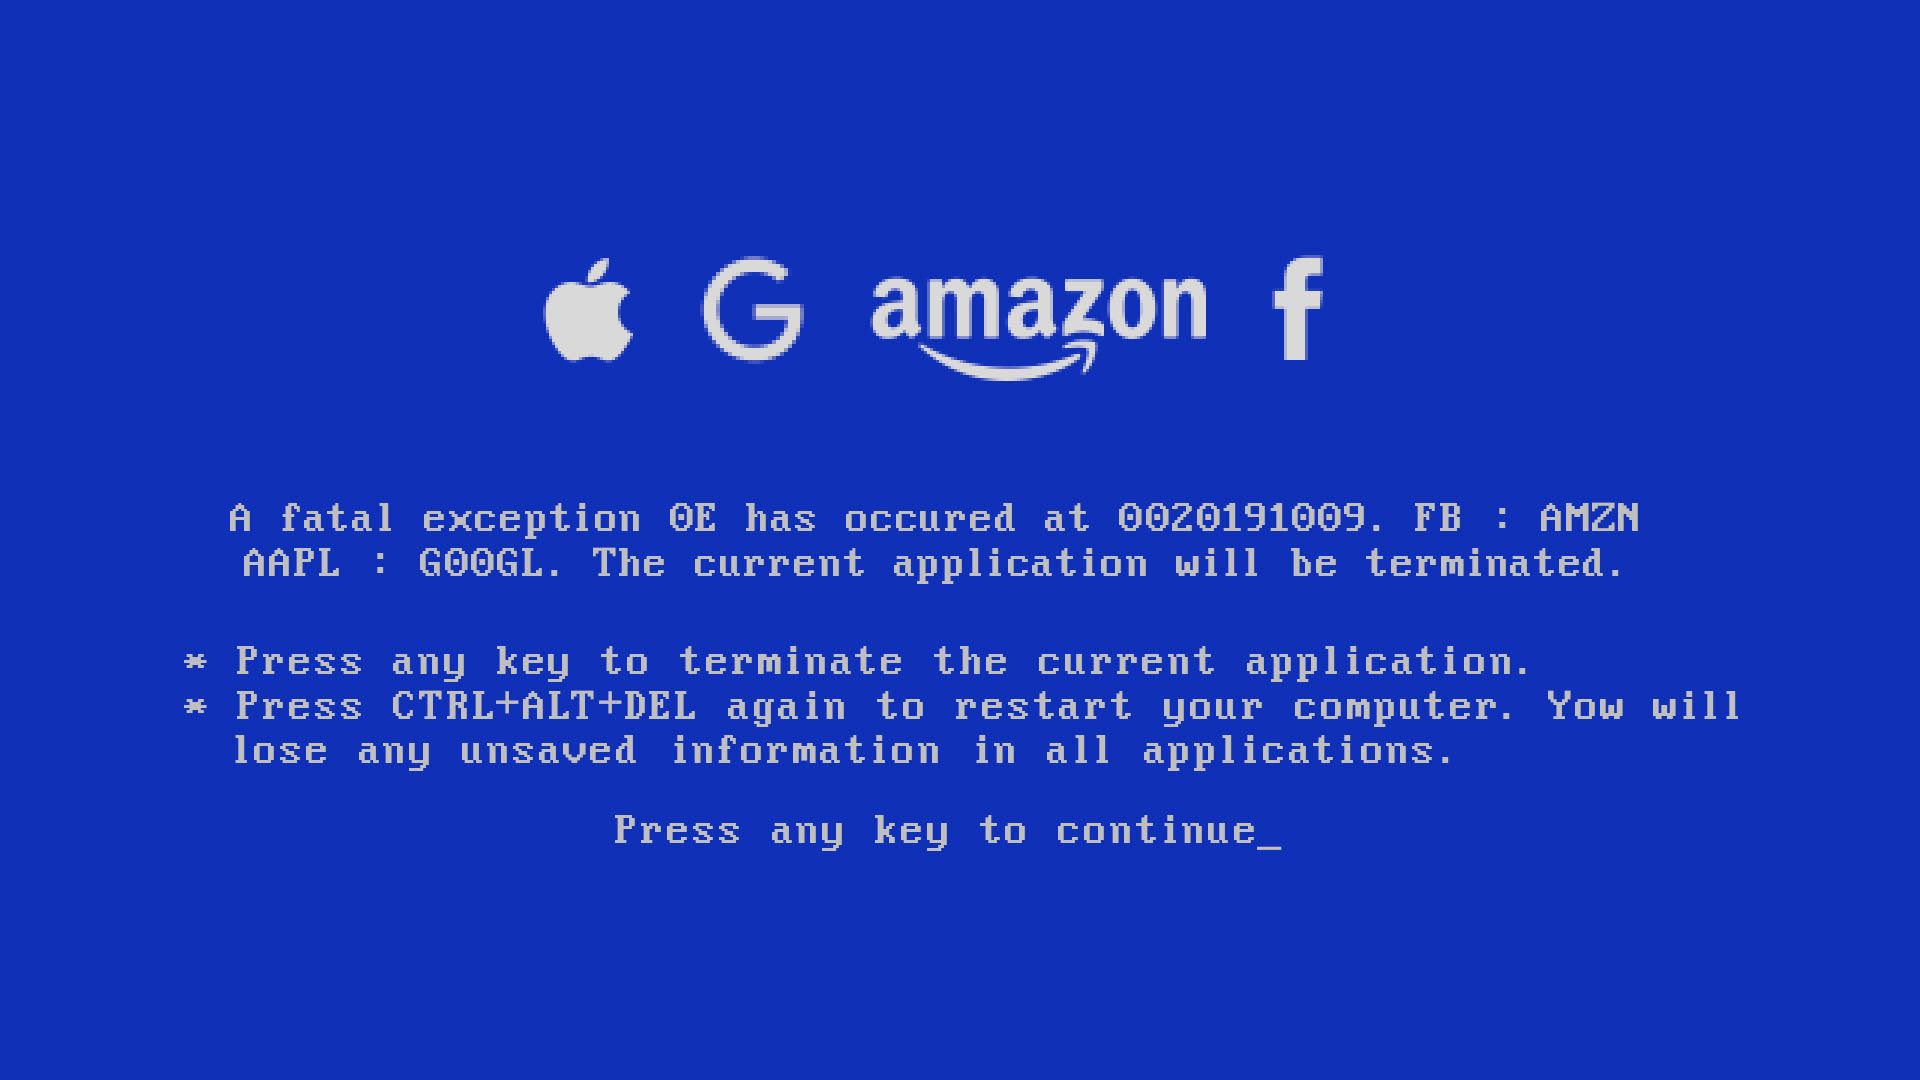 Blue screen of death featuring the Facebook, Apple, Amazon, and Google logos